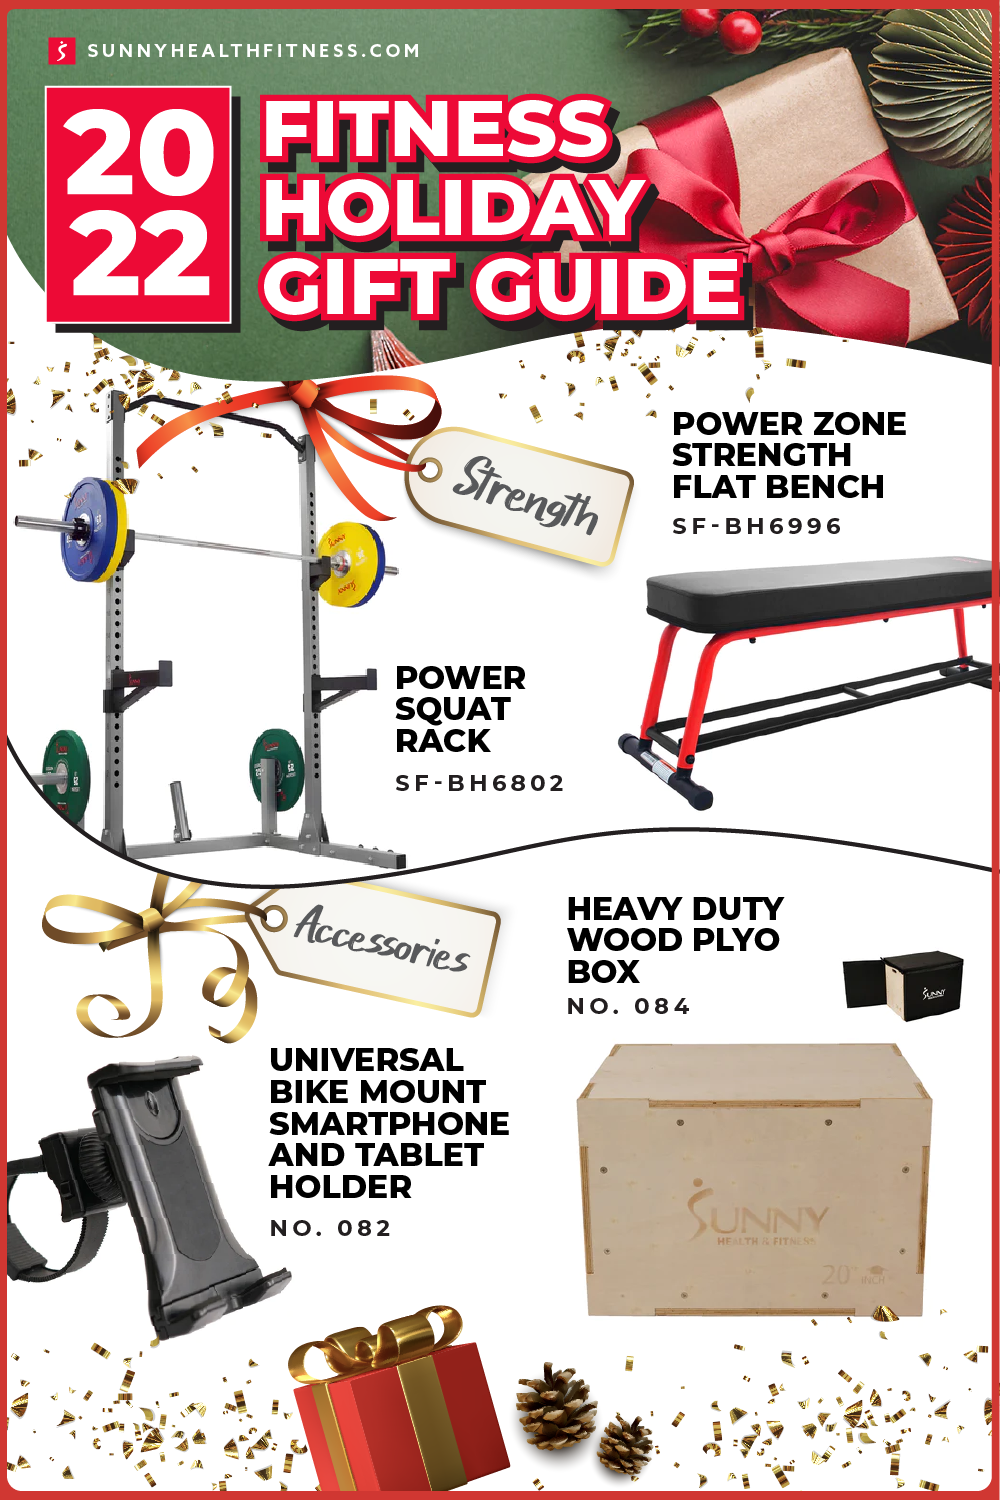 2022 Fitness Holiday Gift Guide - Exercise Equipment Infographic 3